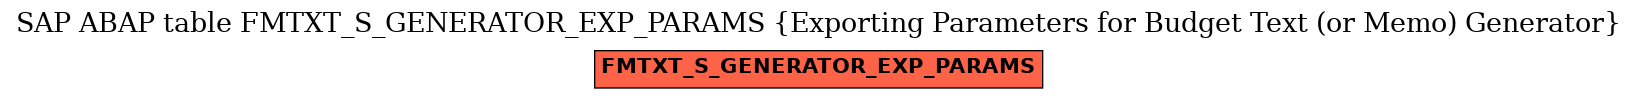 E-R Diagram for table FMTXT_S_GENERATOR_EXP_PARAMS (Exporting Parameters for Budget Text (or Memo) Generator)